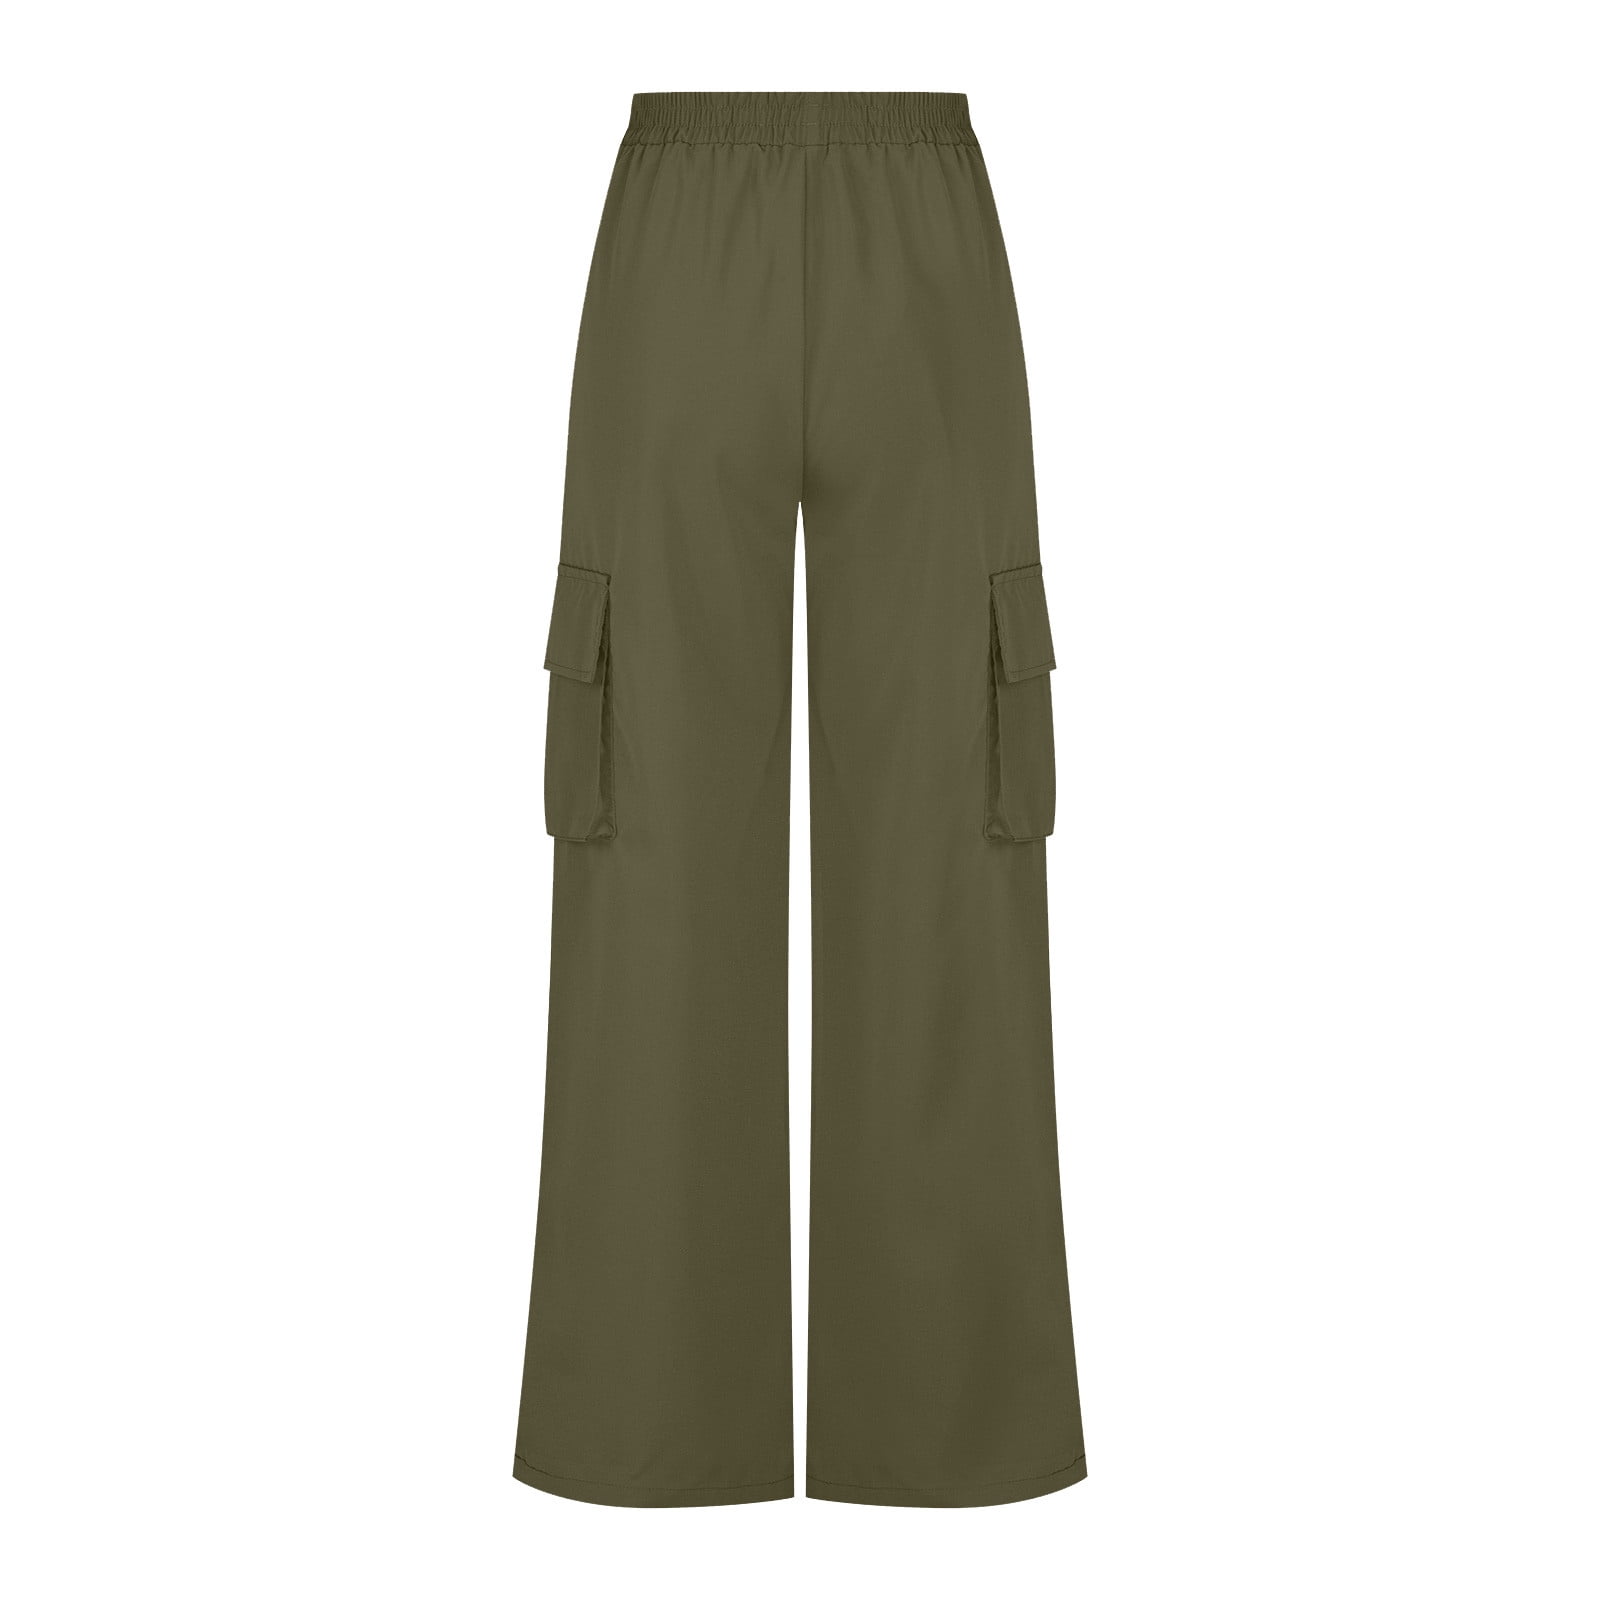 JWZUY Women's Elastic Waist Wide Leg Pants Casual Loose Cargo Pants with  Pockets 5-Army Green X-Large 